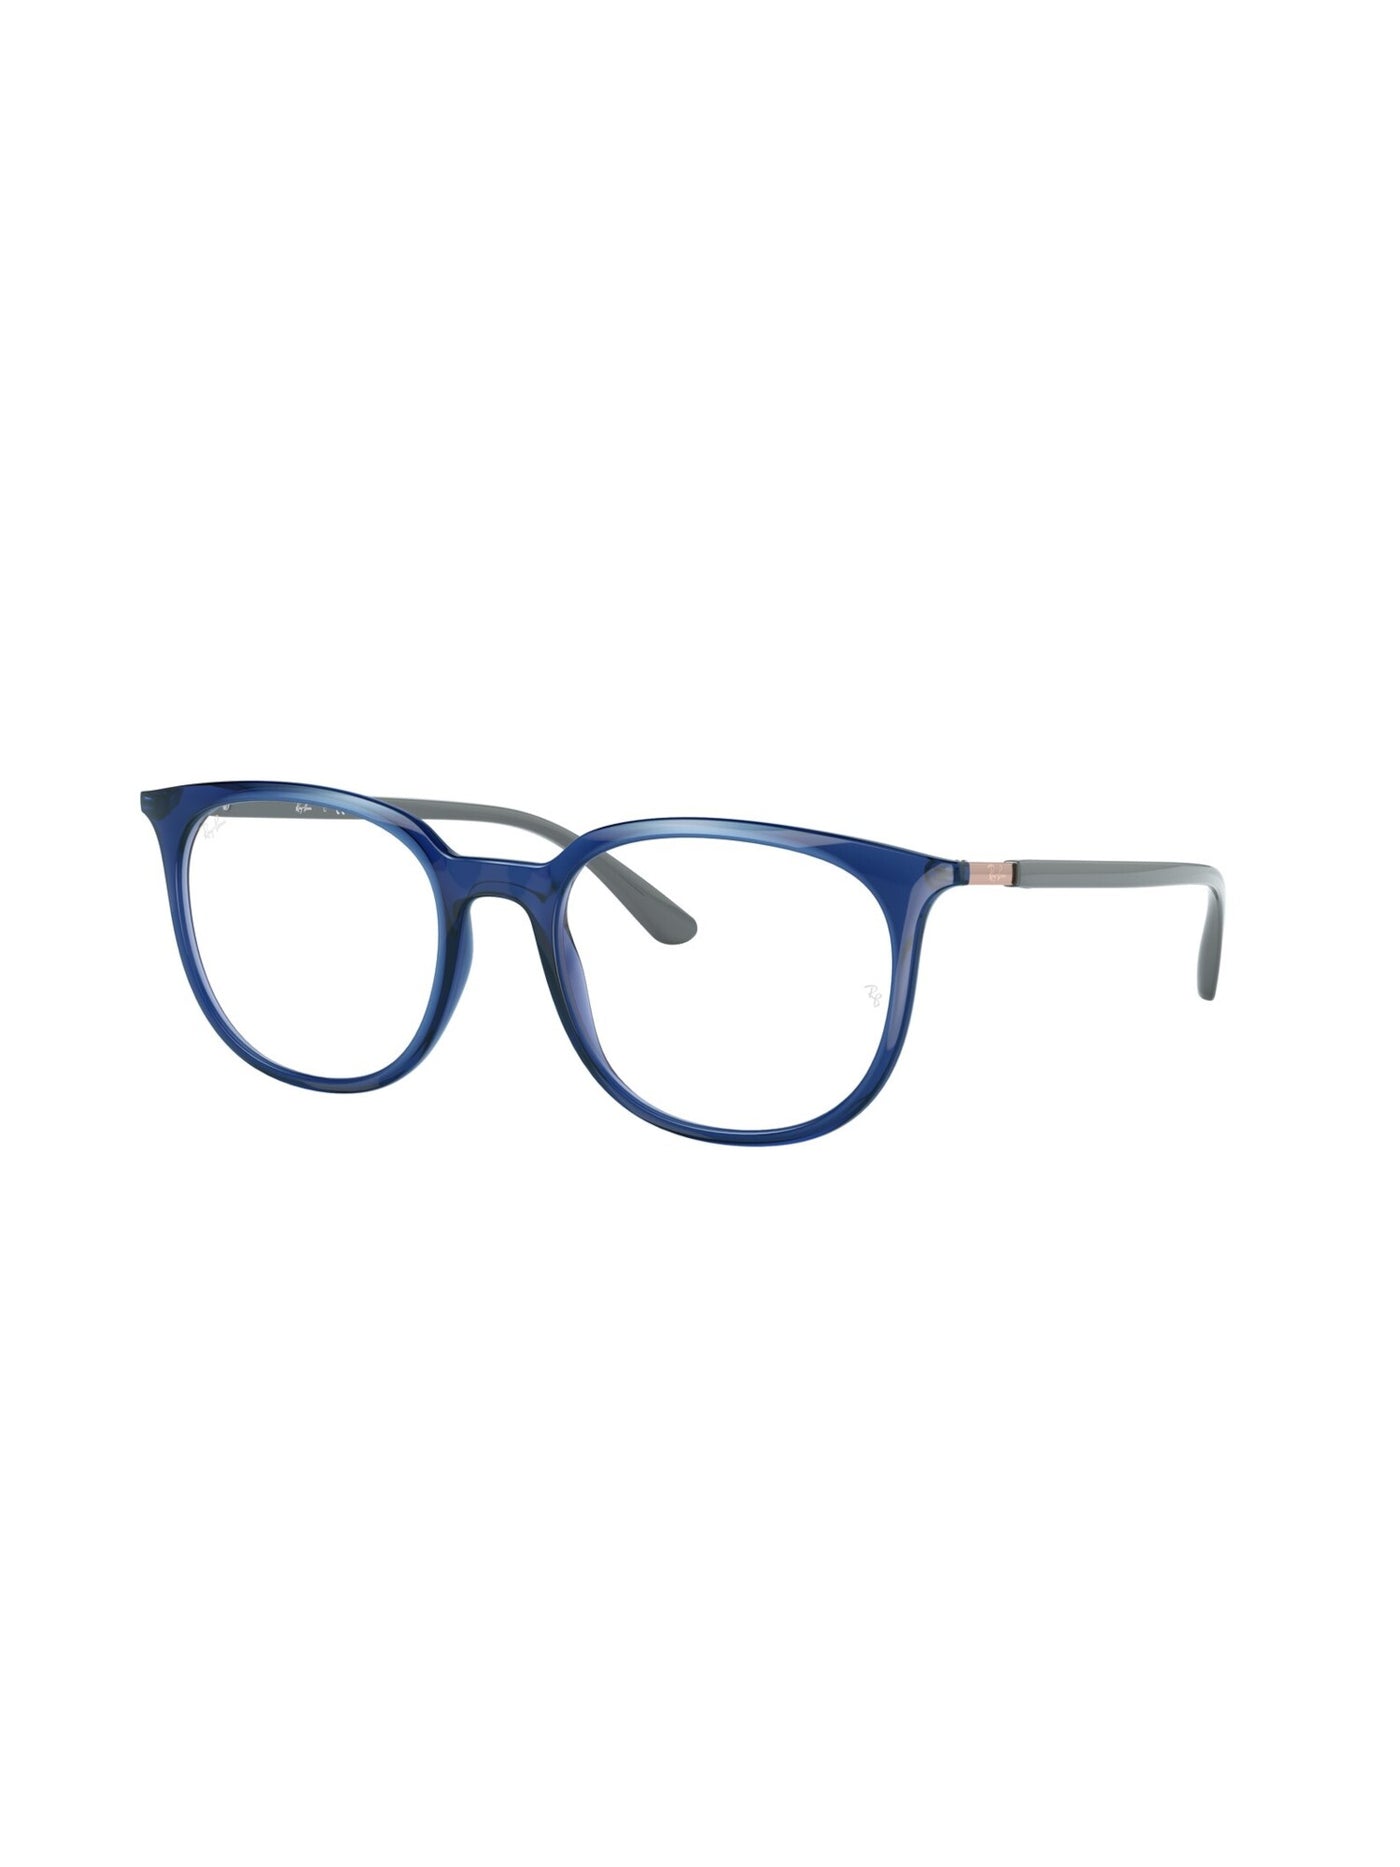 Ray-Ban RX7046 Erika Customizable Transparent Blue 51-18-140 Round Full Rim Unisex Eyeglasses Frames With Case and Cloth